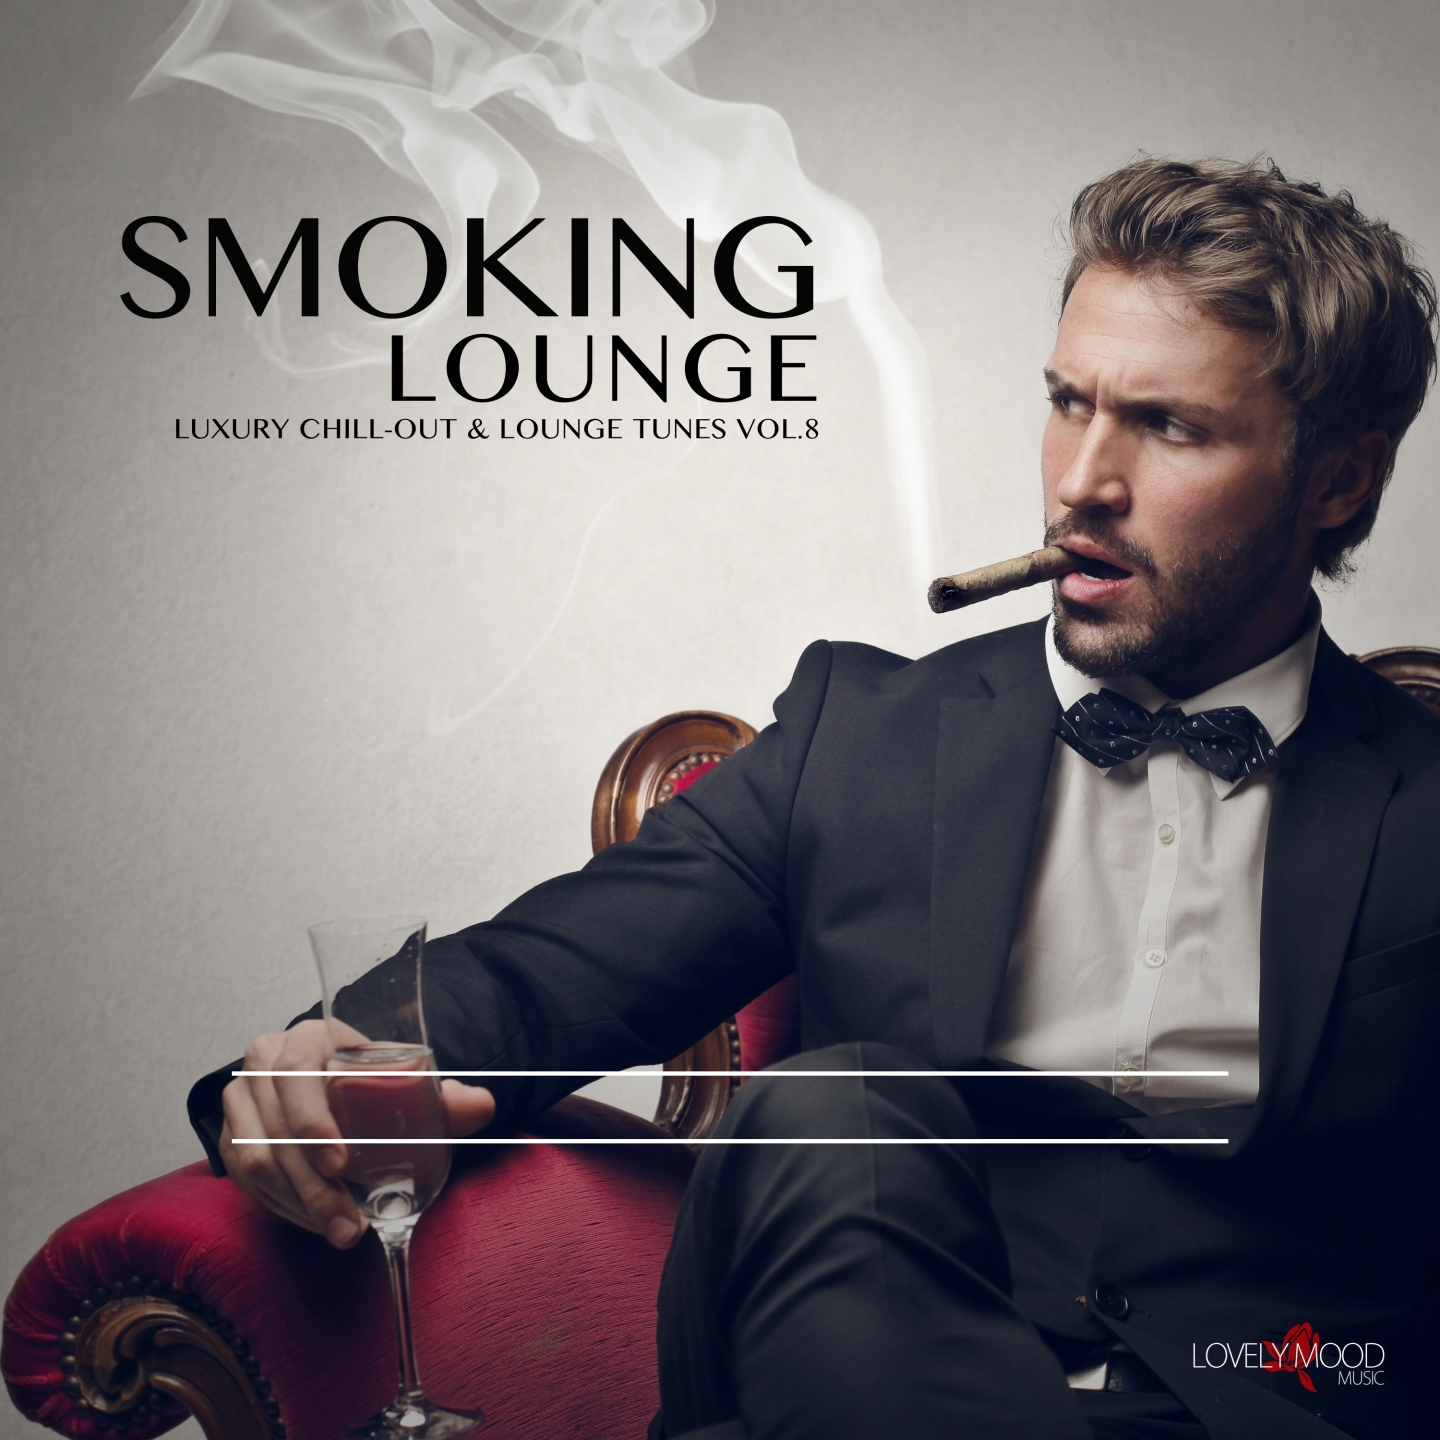 Smoking Lounge - Luxury Chill-Out & Lounge Tunes, Vol. 8